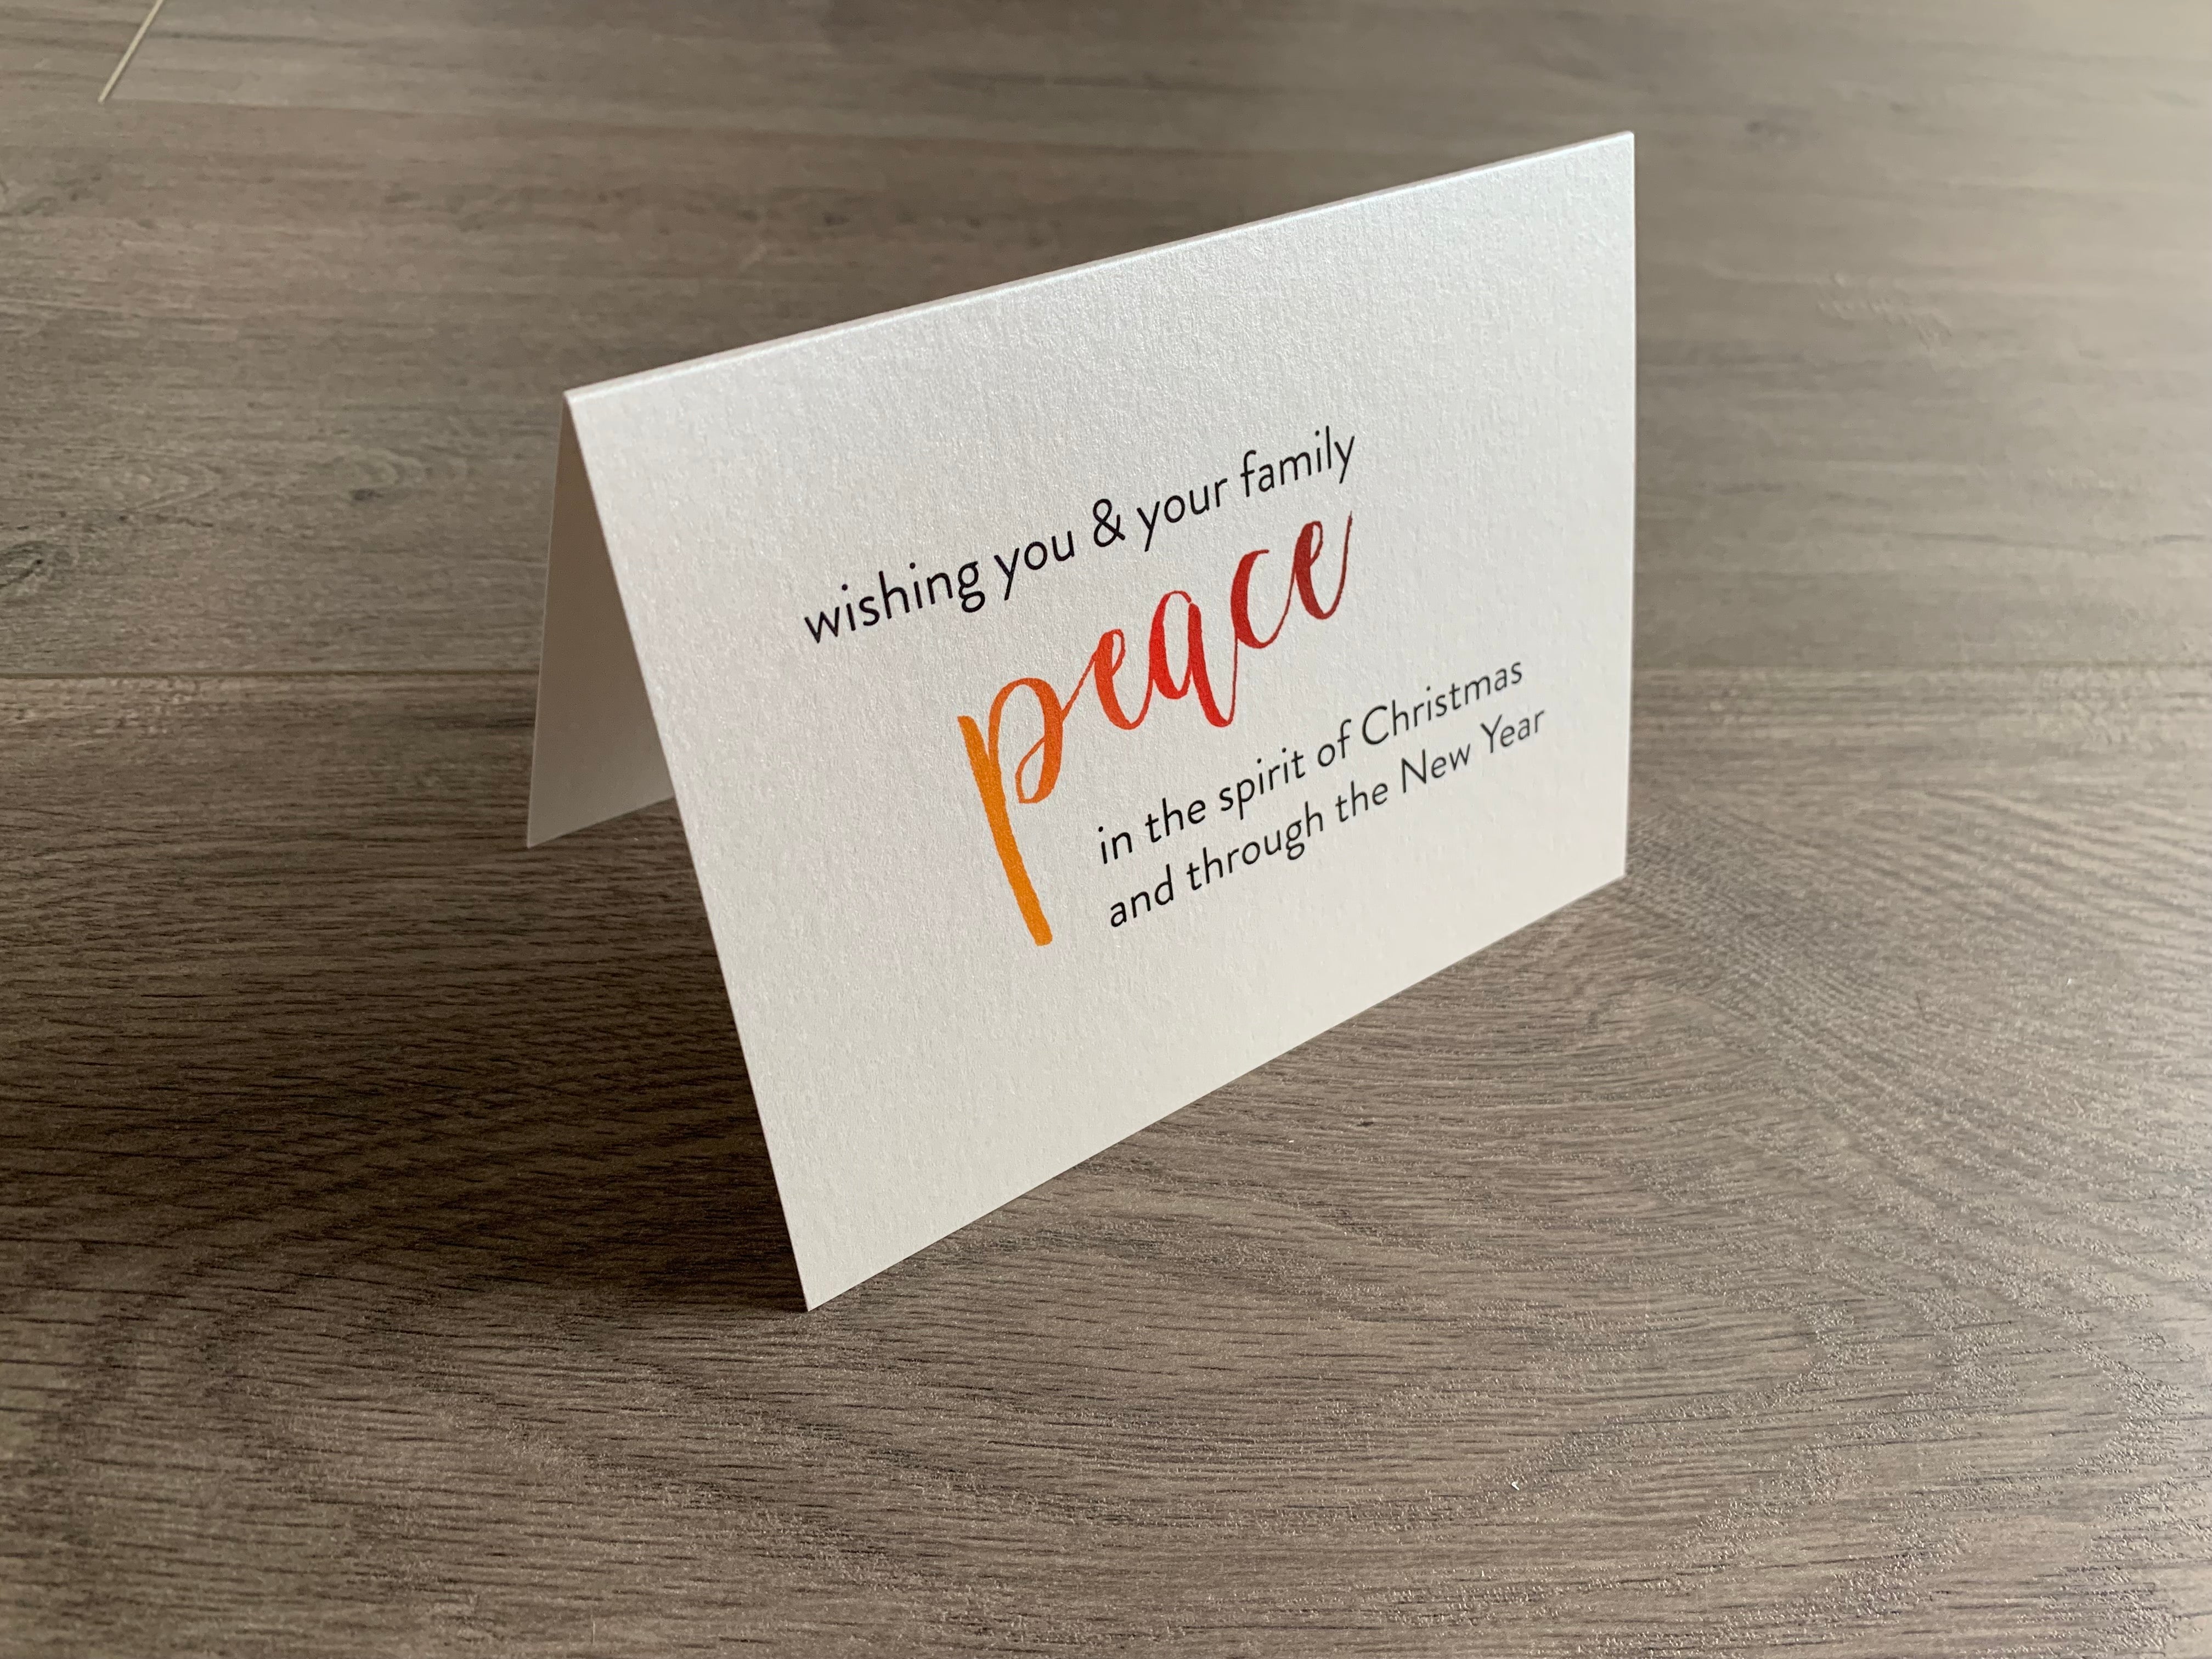 A shimmery cream notecard is propped up on a wooden floor. The card says, "wishing you and your family peace in the spirit of Christmas and through the new year." The word "peace" is in a script font that fades from orange to red. Meaning of Christmas collection by Stationare.